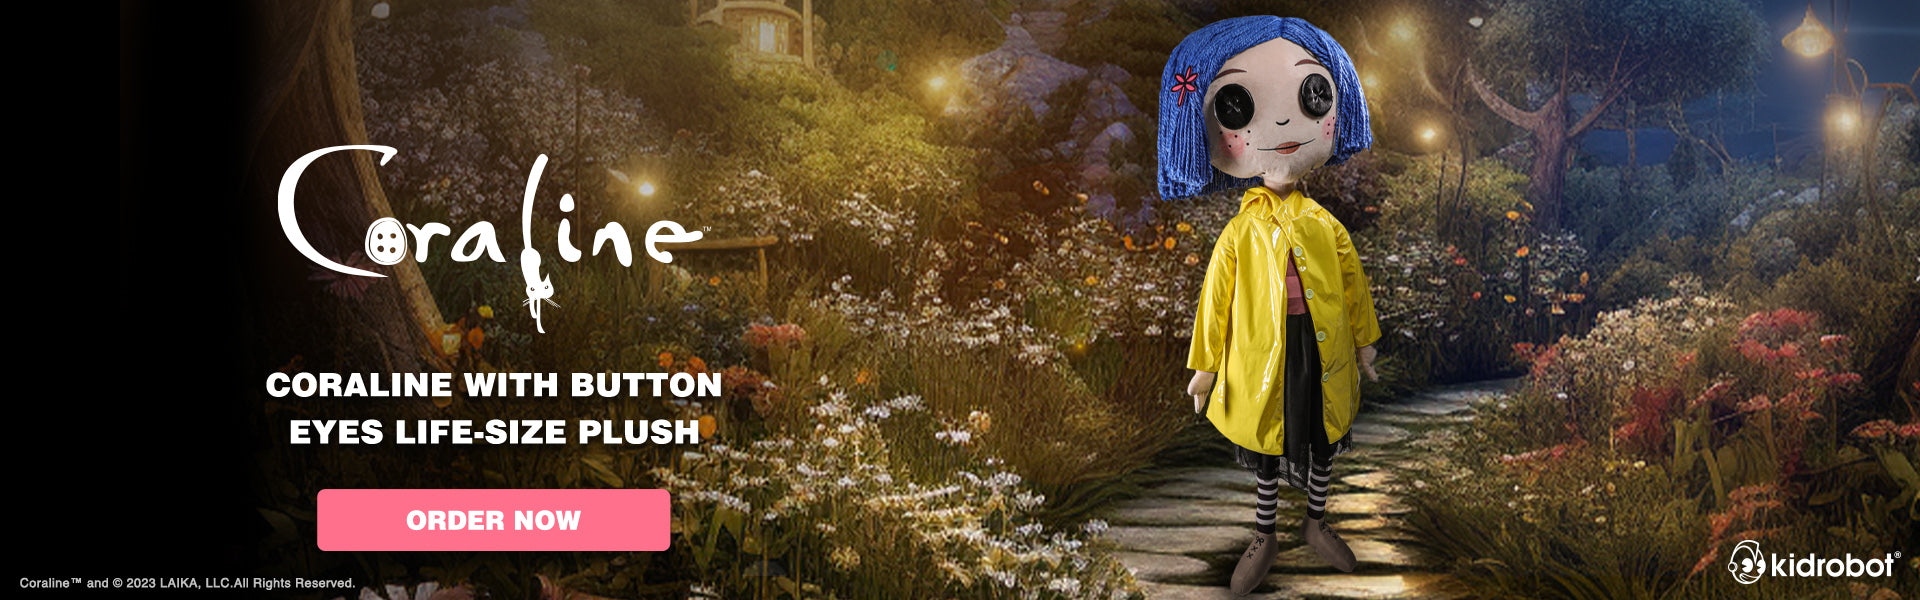 Coraline with Button Eyes Life-Size Plush Doll (PRE-ORDER)